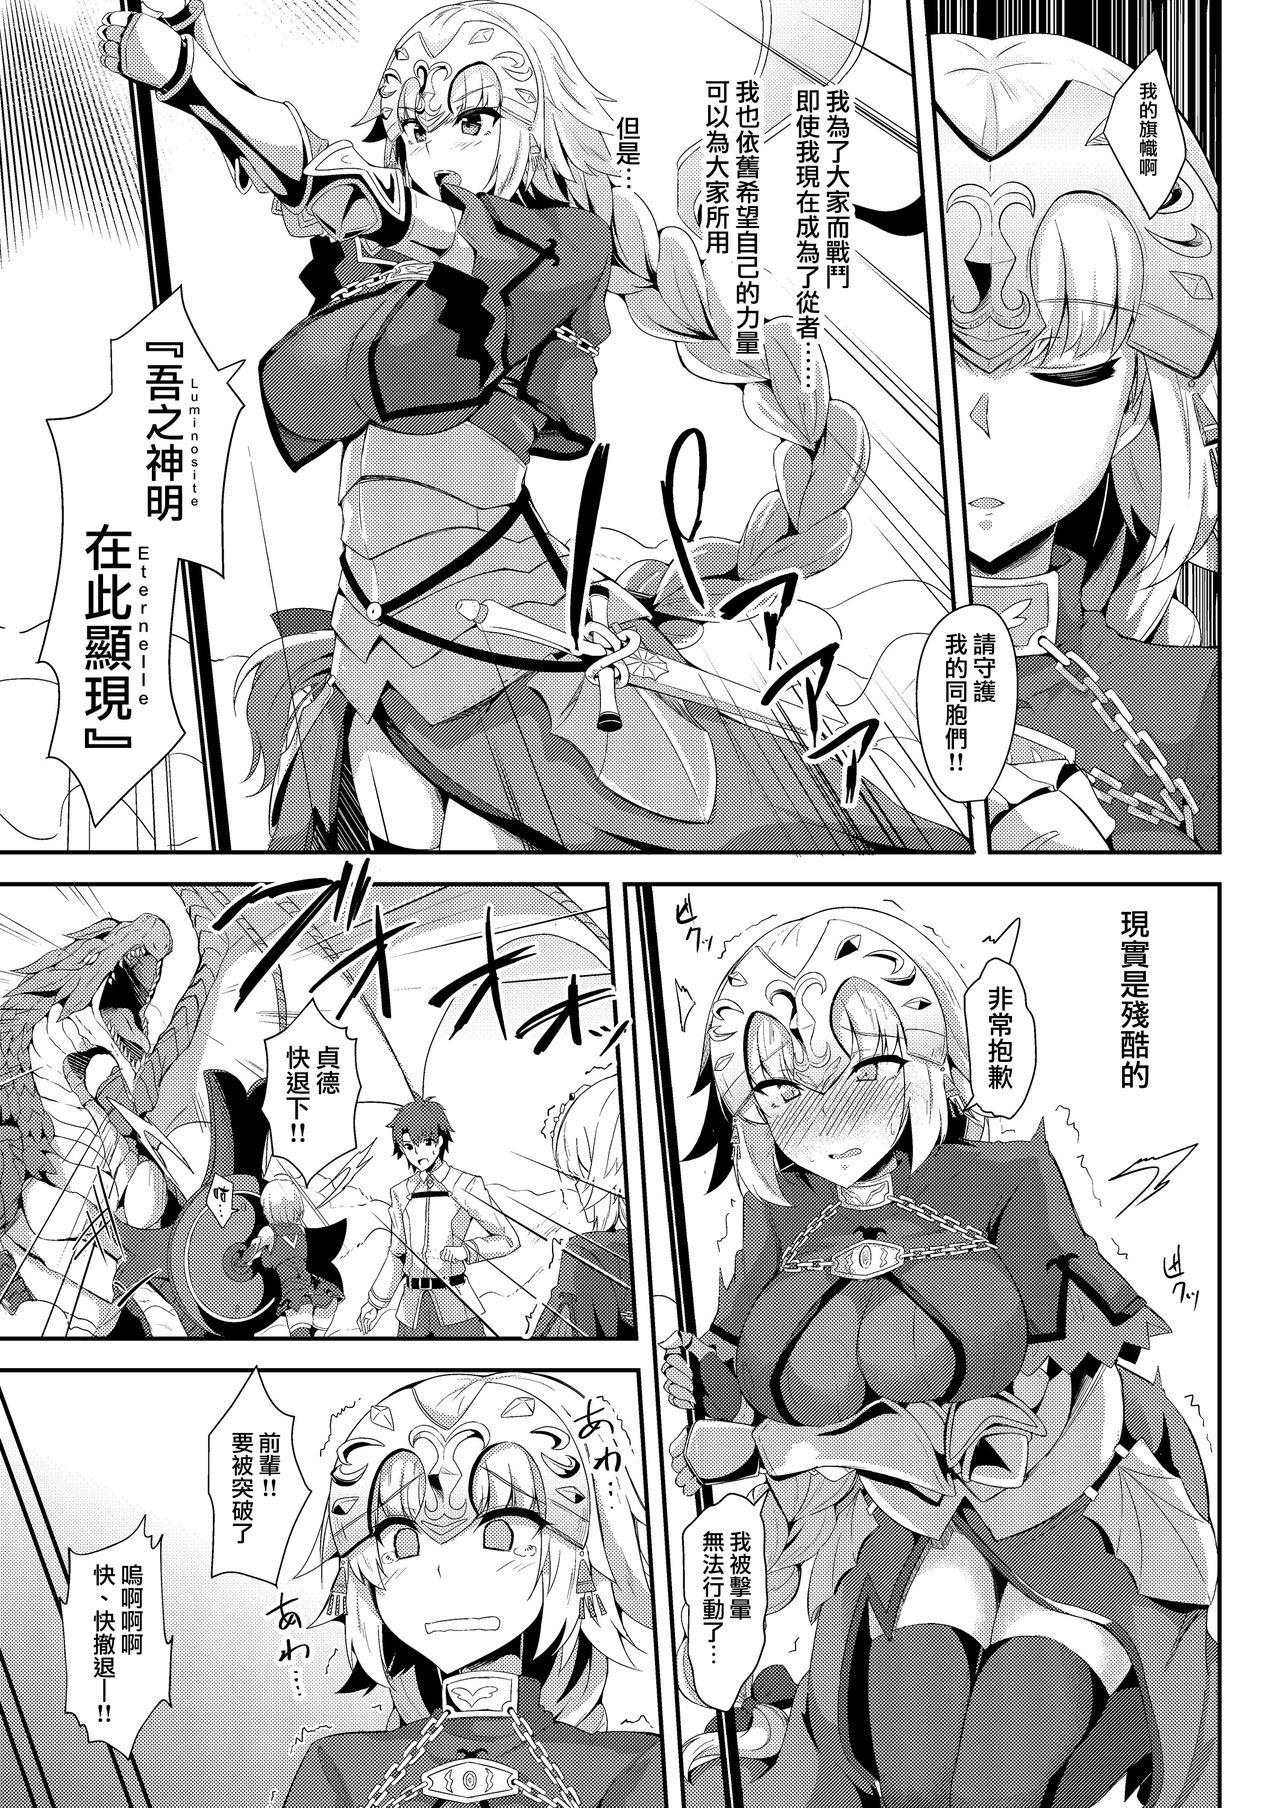 Cheerleader Jeanne no Onegai Kanaechaou!! - Fate grand order Pervs - Page 4